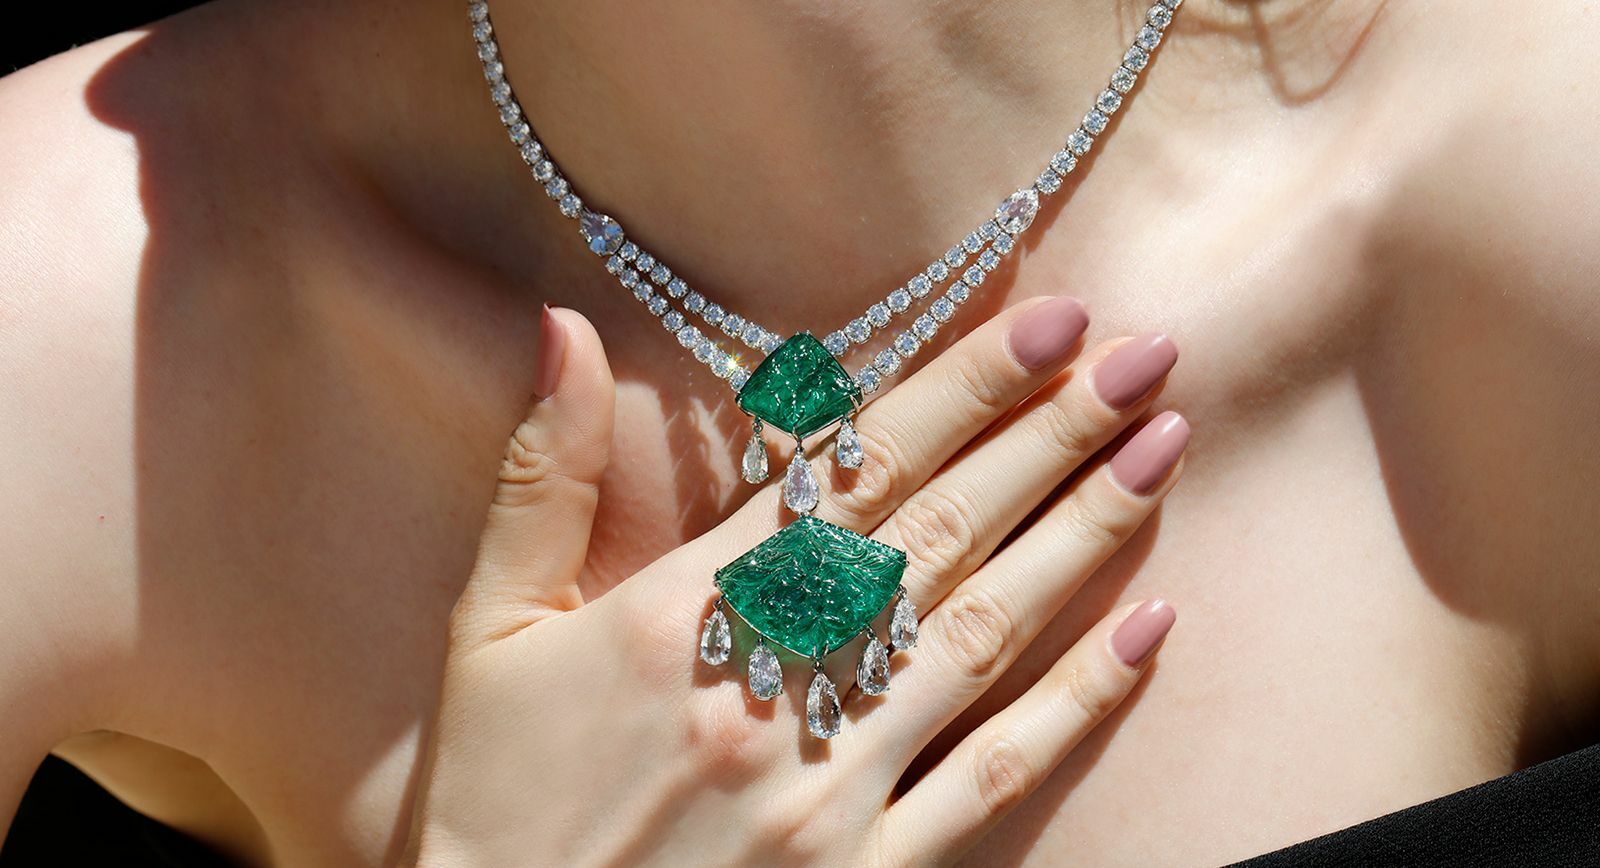 Bayco carved emerald necklace 